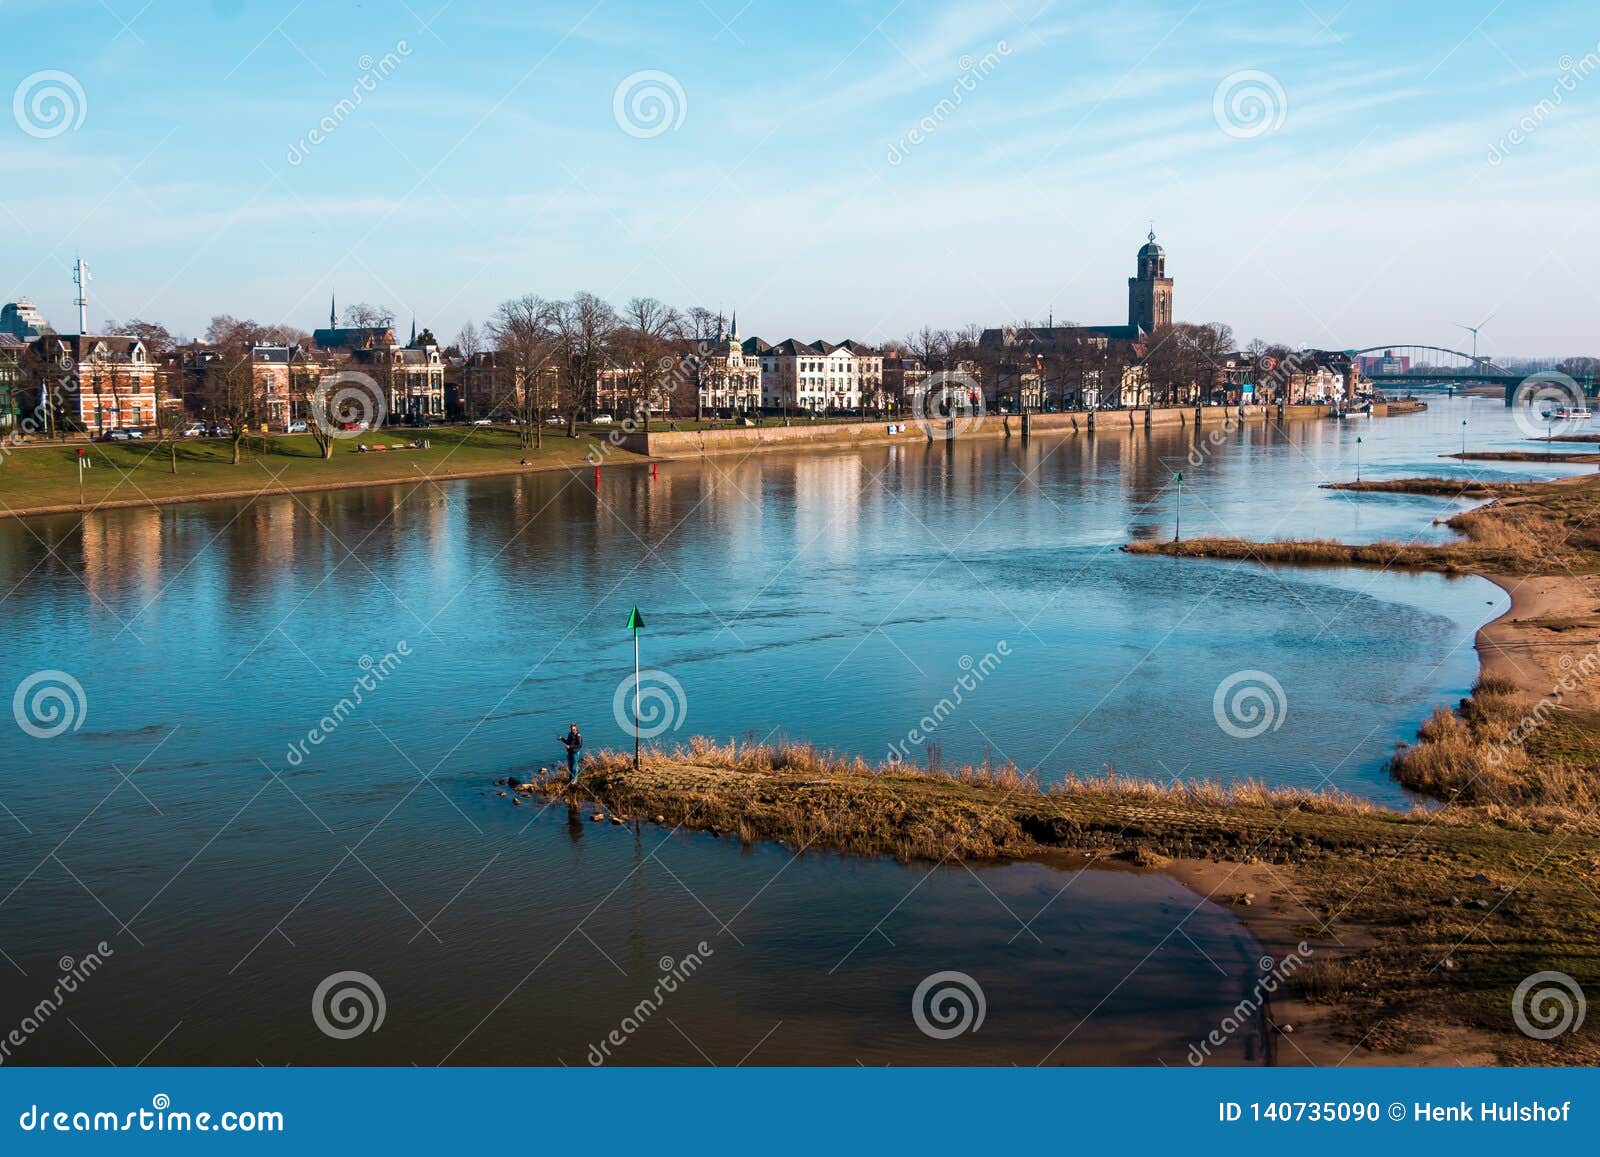 deventer city view at the river the ijssel